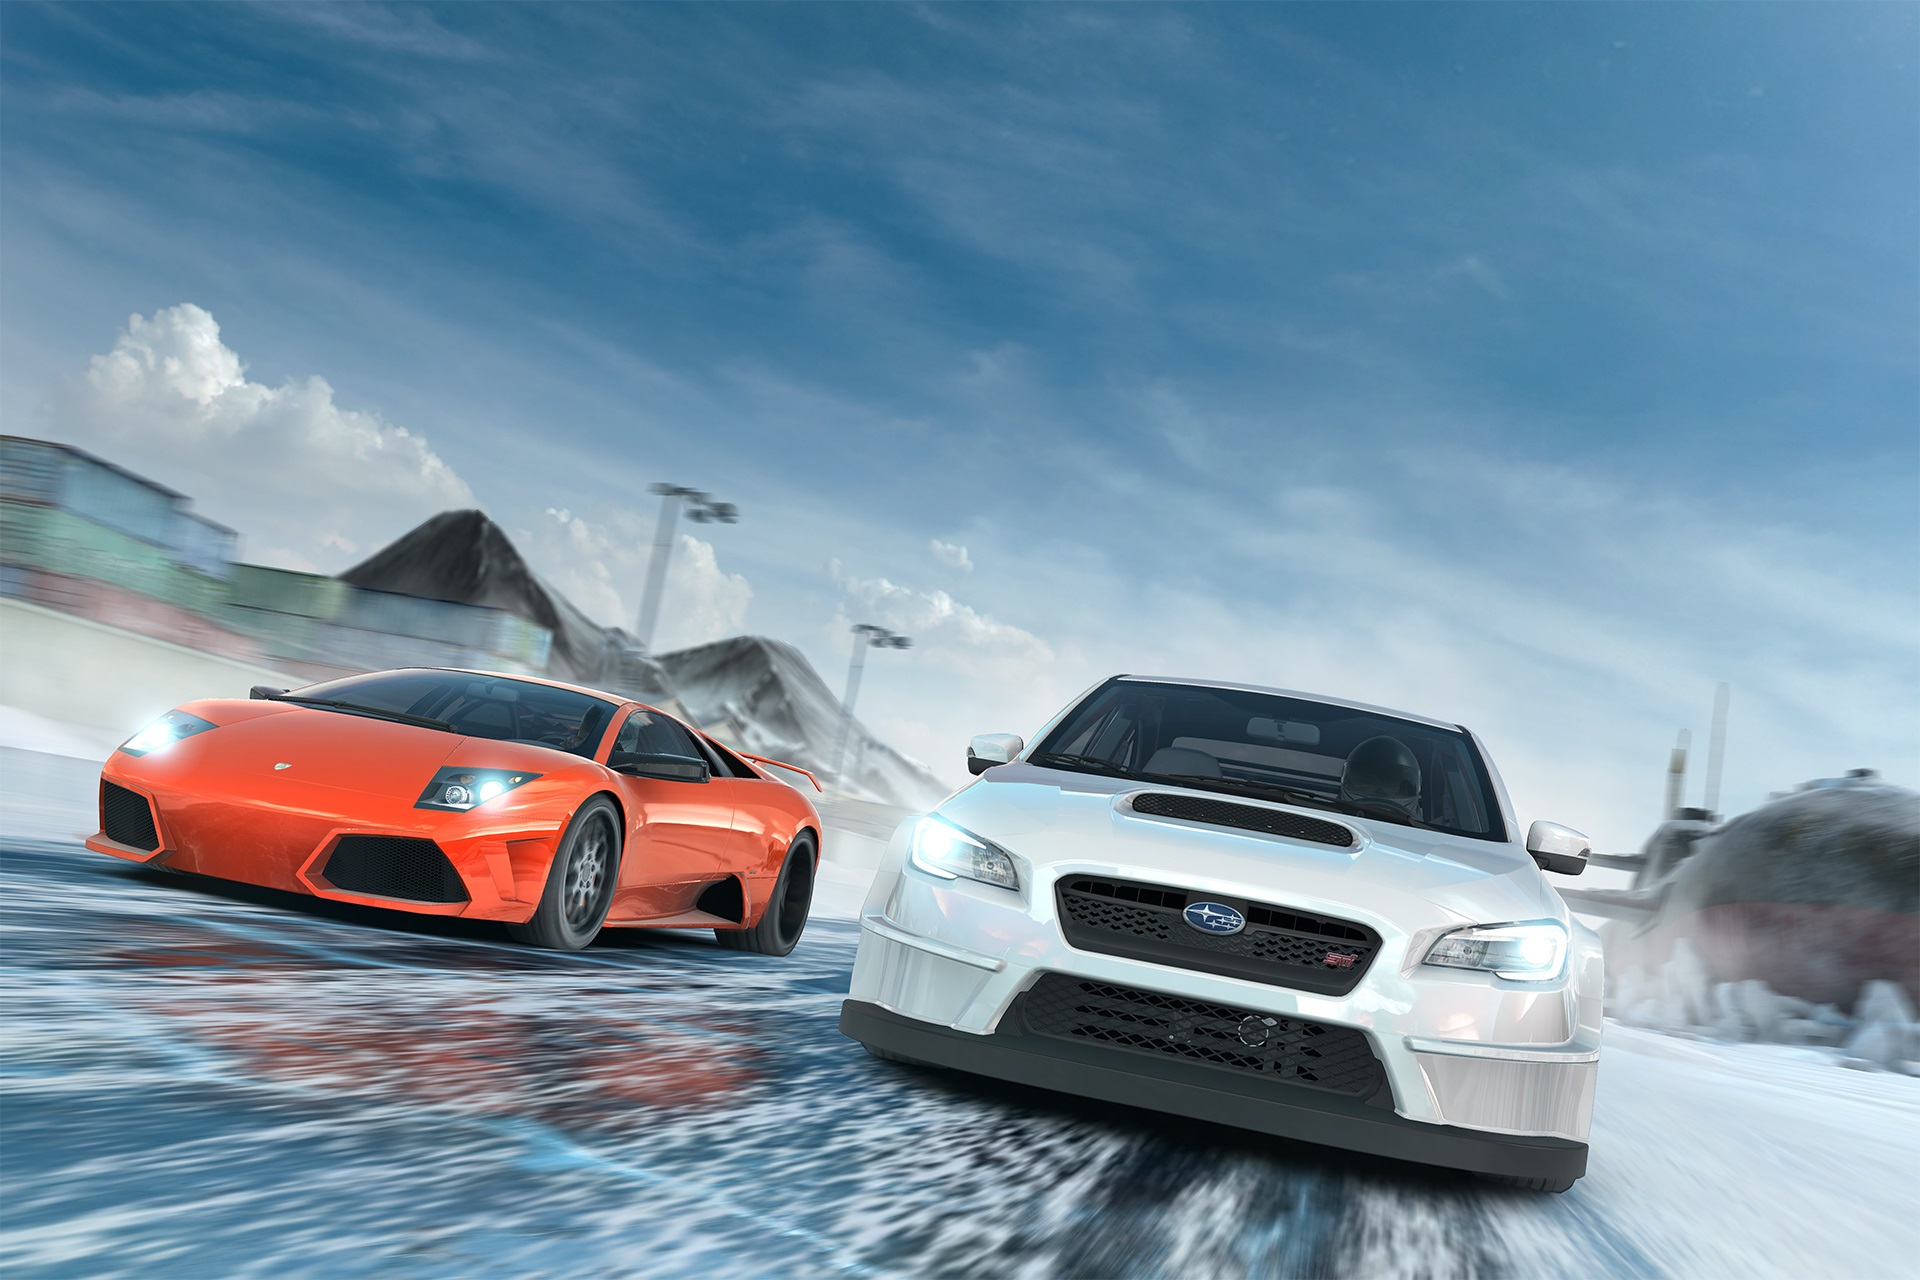  Fast  Furious  Returns to CSR Racing  2 Gaming Cypher